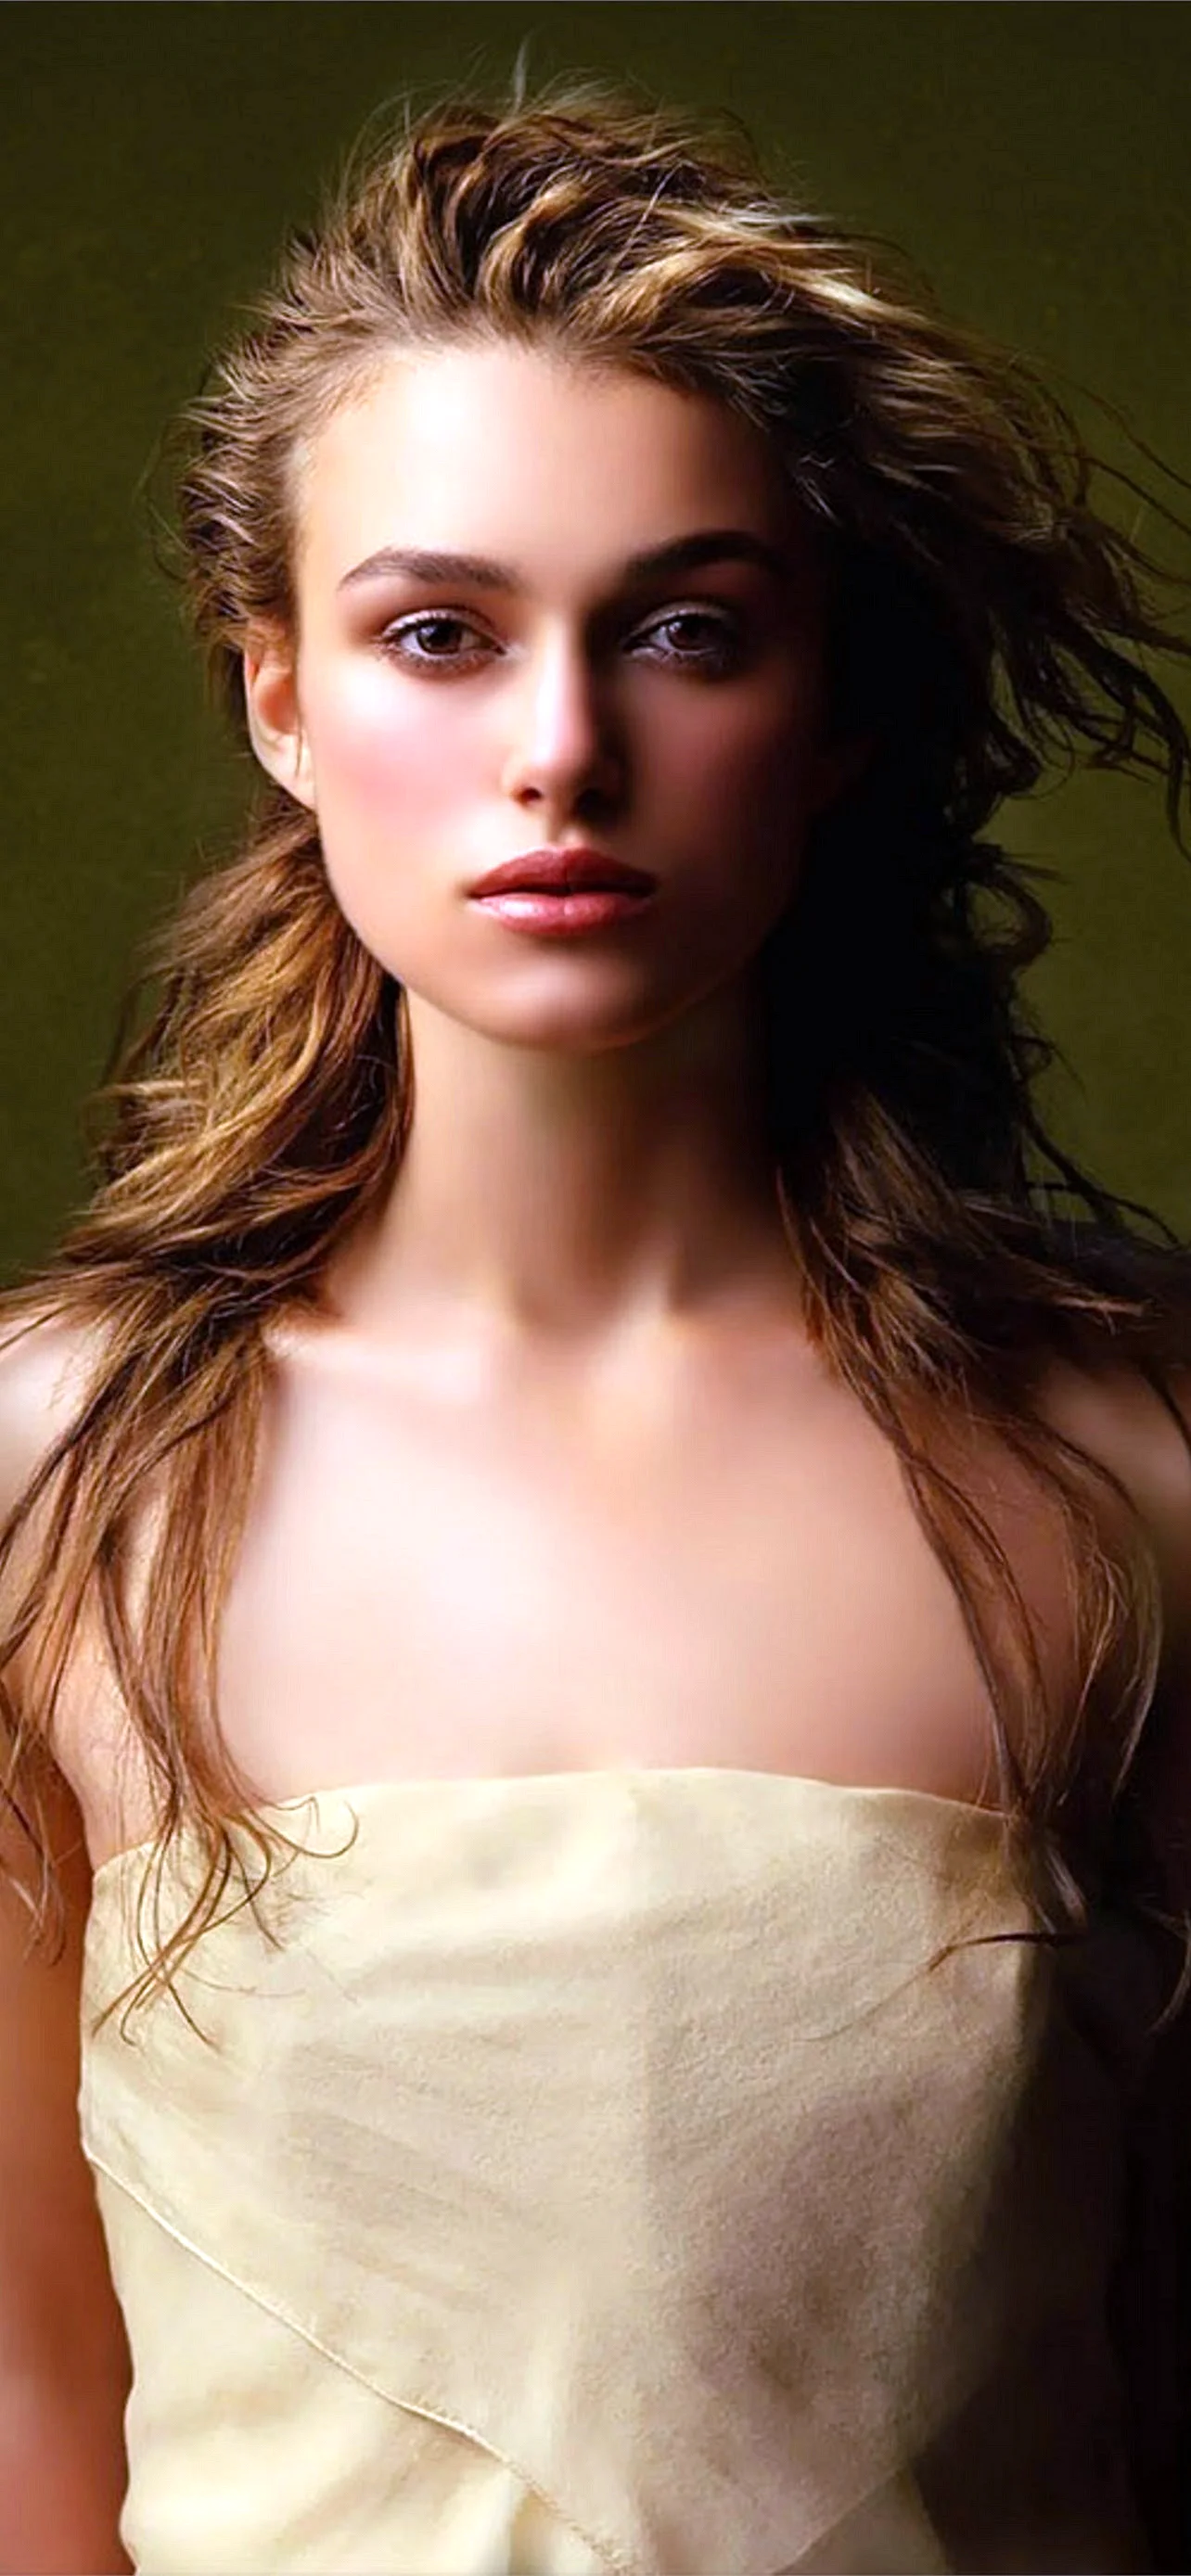 Keira Knightley Wallpaper for iPhone 12 Pro Max